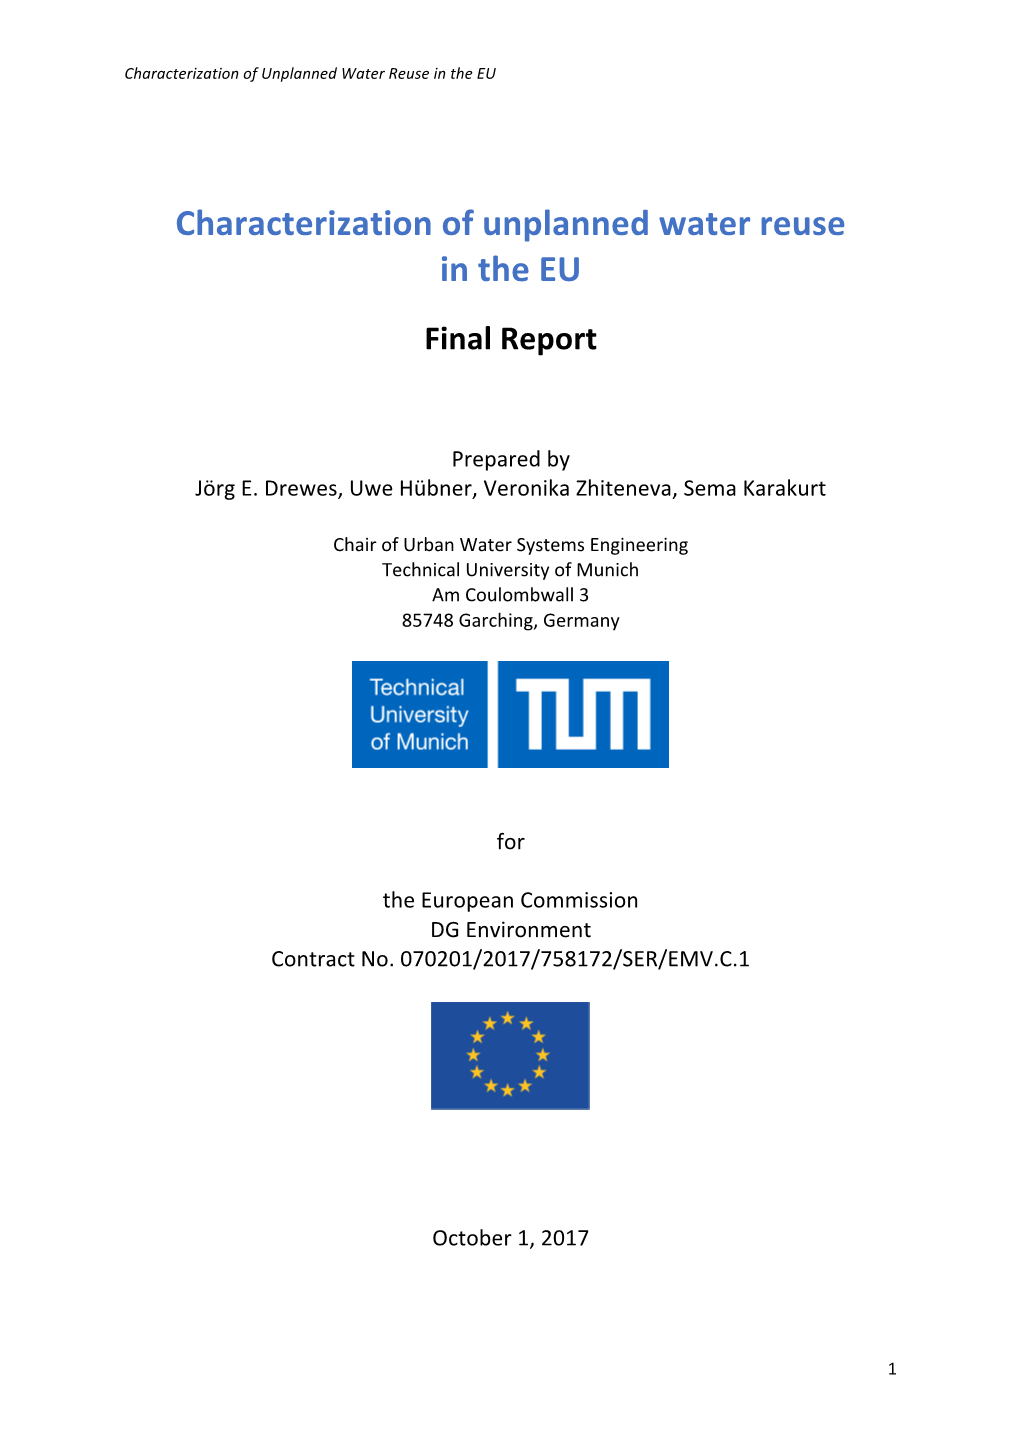 Characterization of Unplanned Water Reuse in the EU